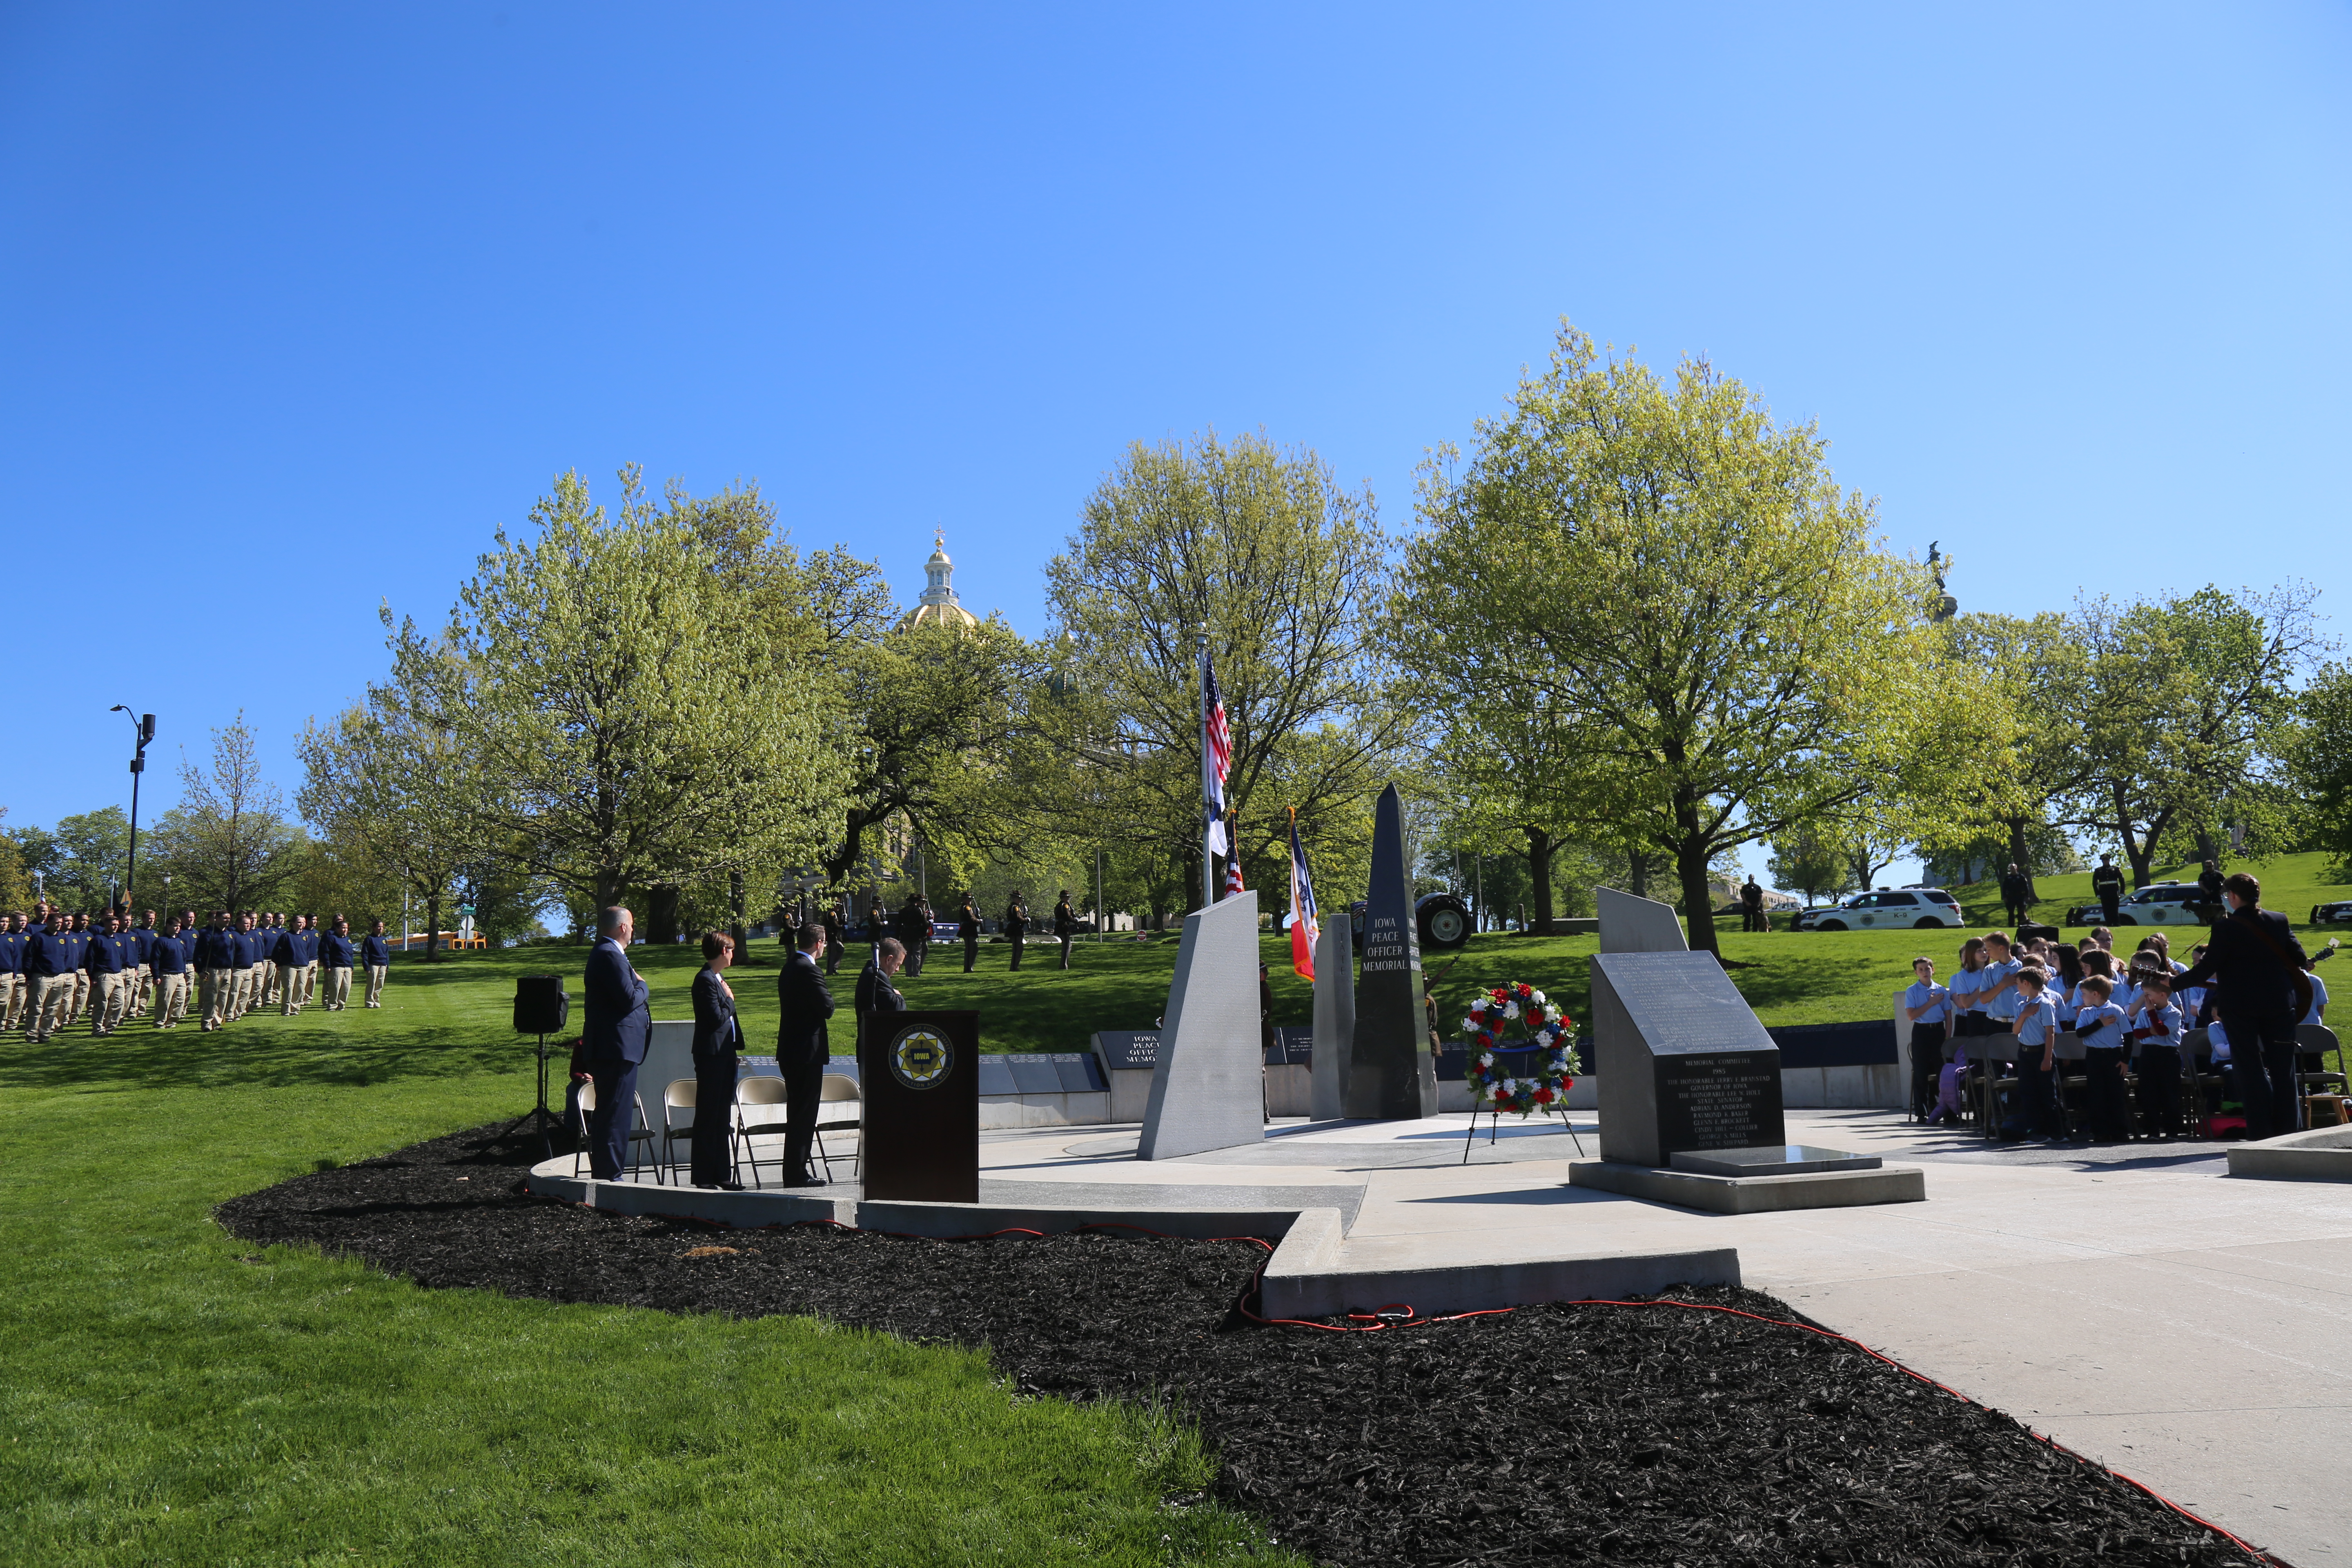 Photo of ceremony featuring monument, Governor Kim Reynolds, Lt. Governor Gregg, DPS Commissioner Bayens and guests